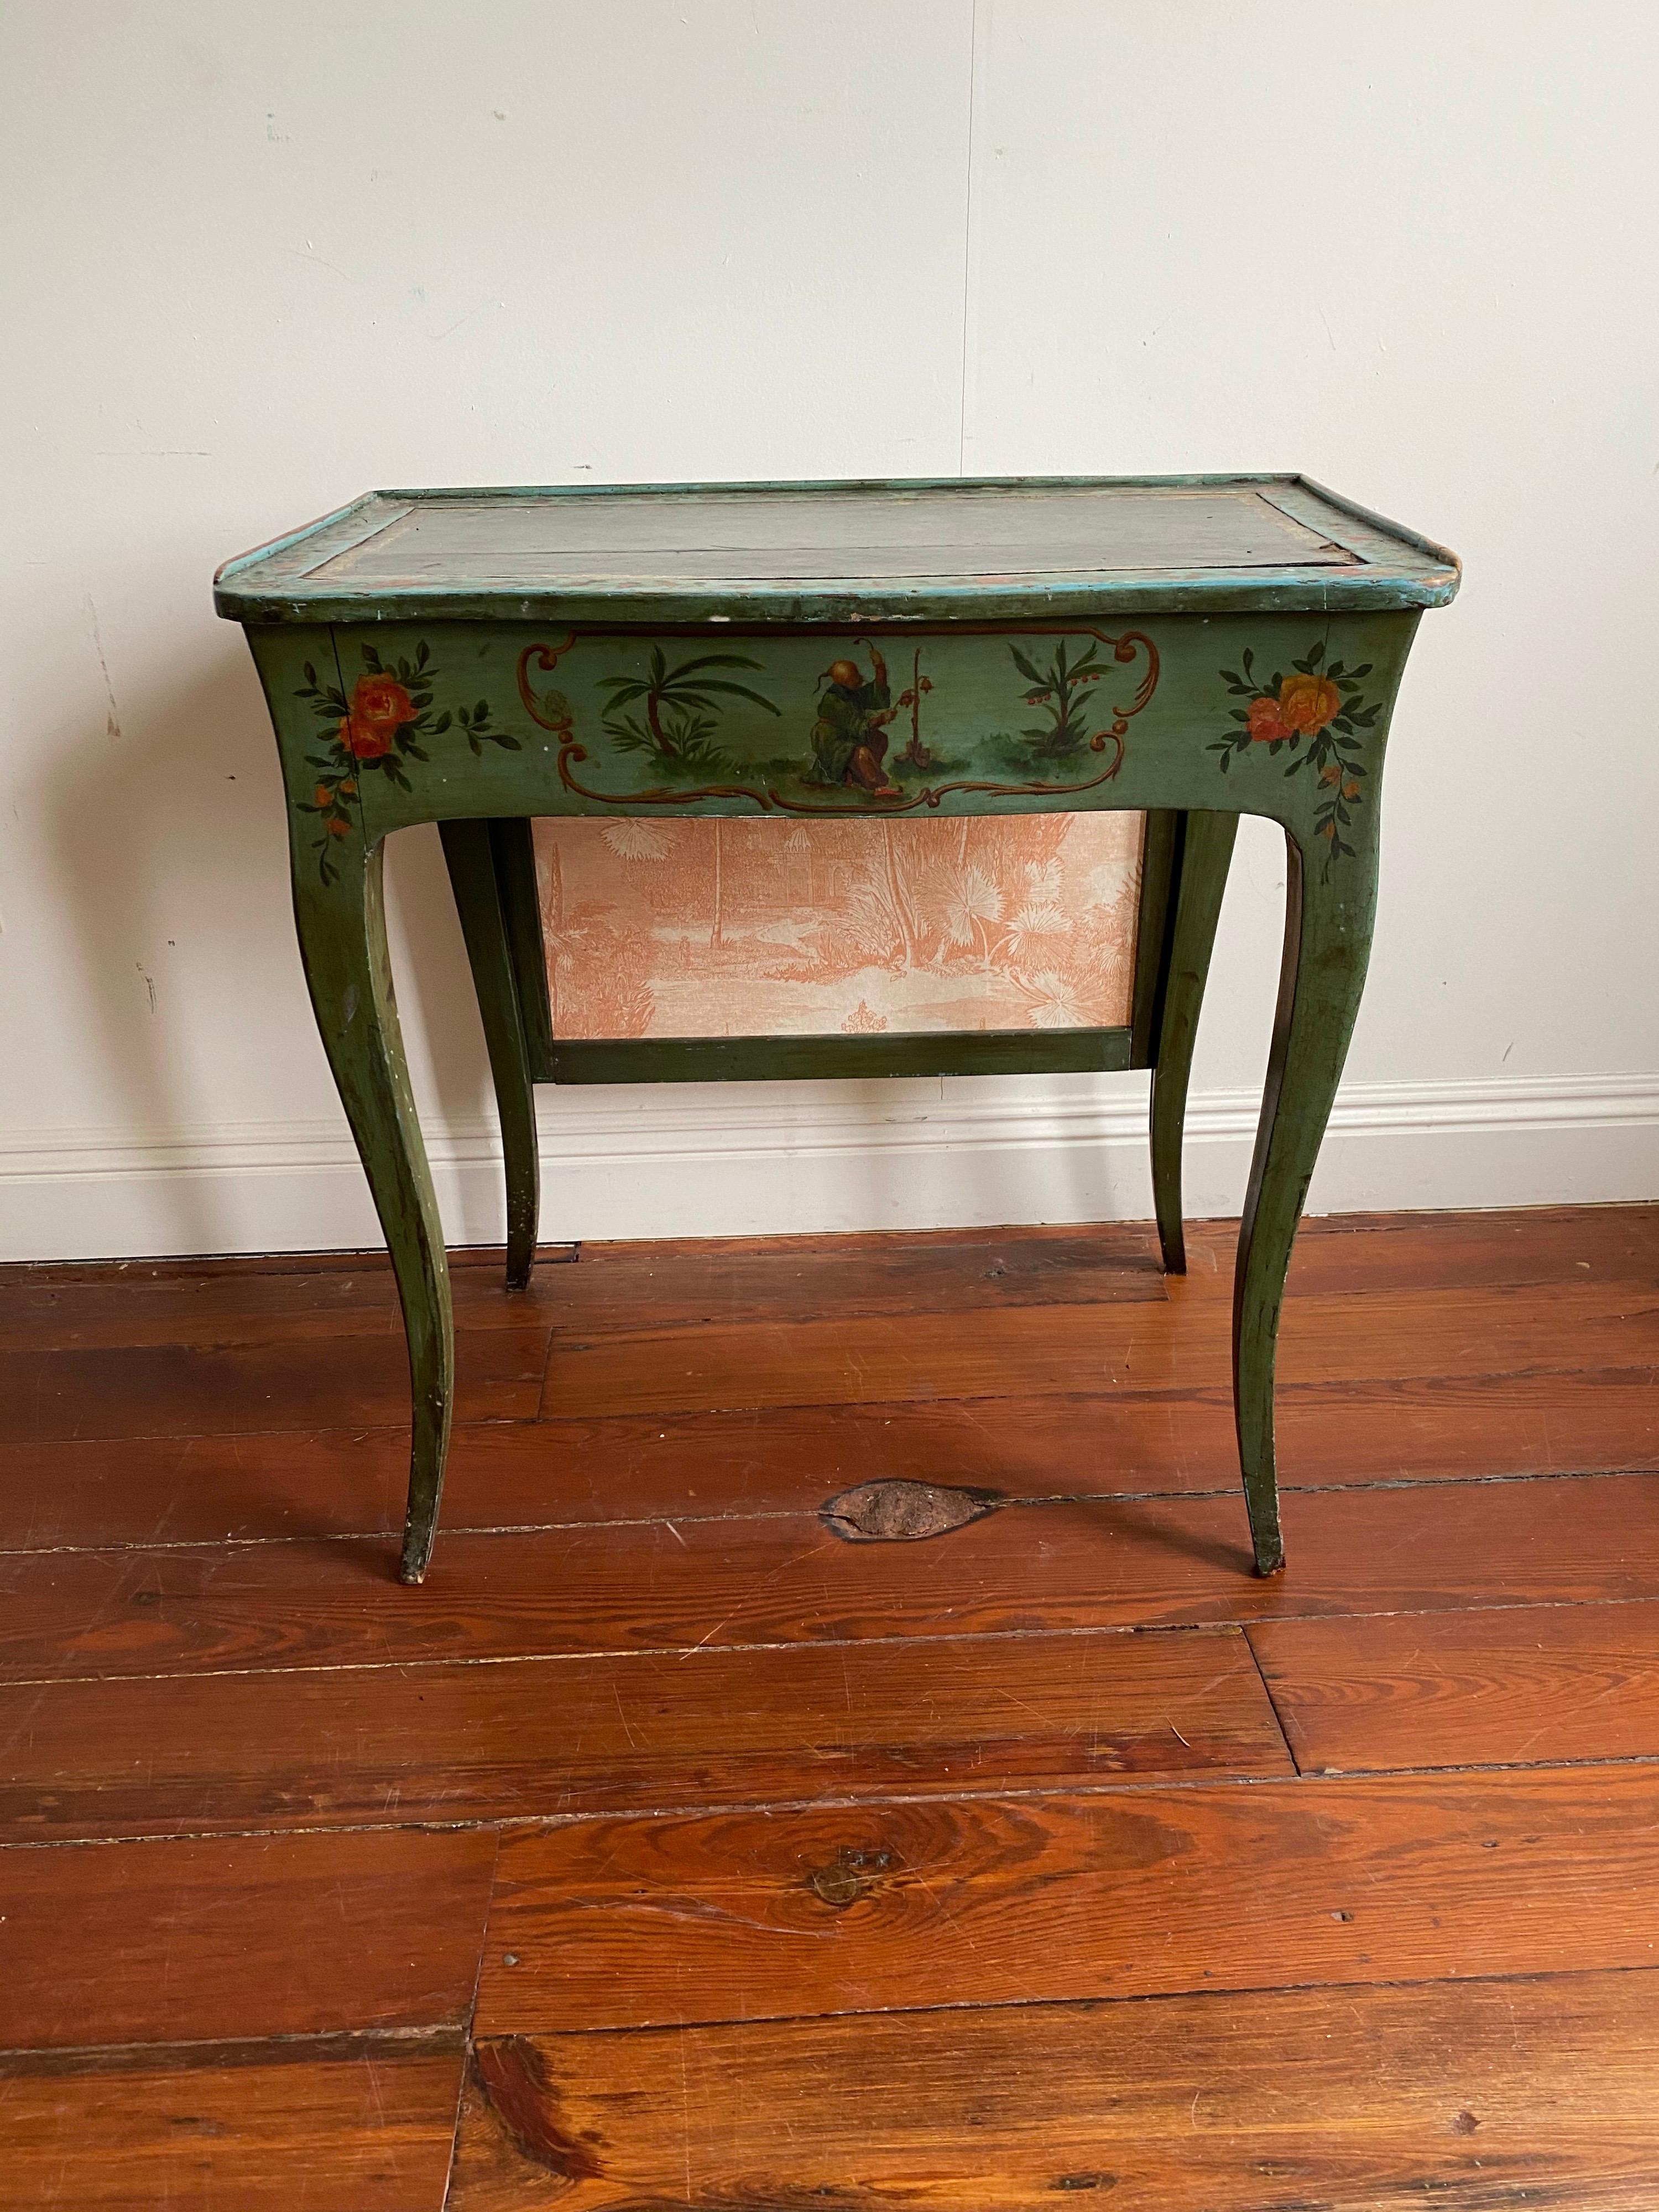 Painted Italian occasional table with draft screen ( removable ), one drawer on side.